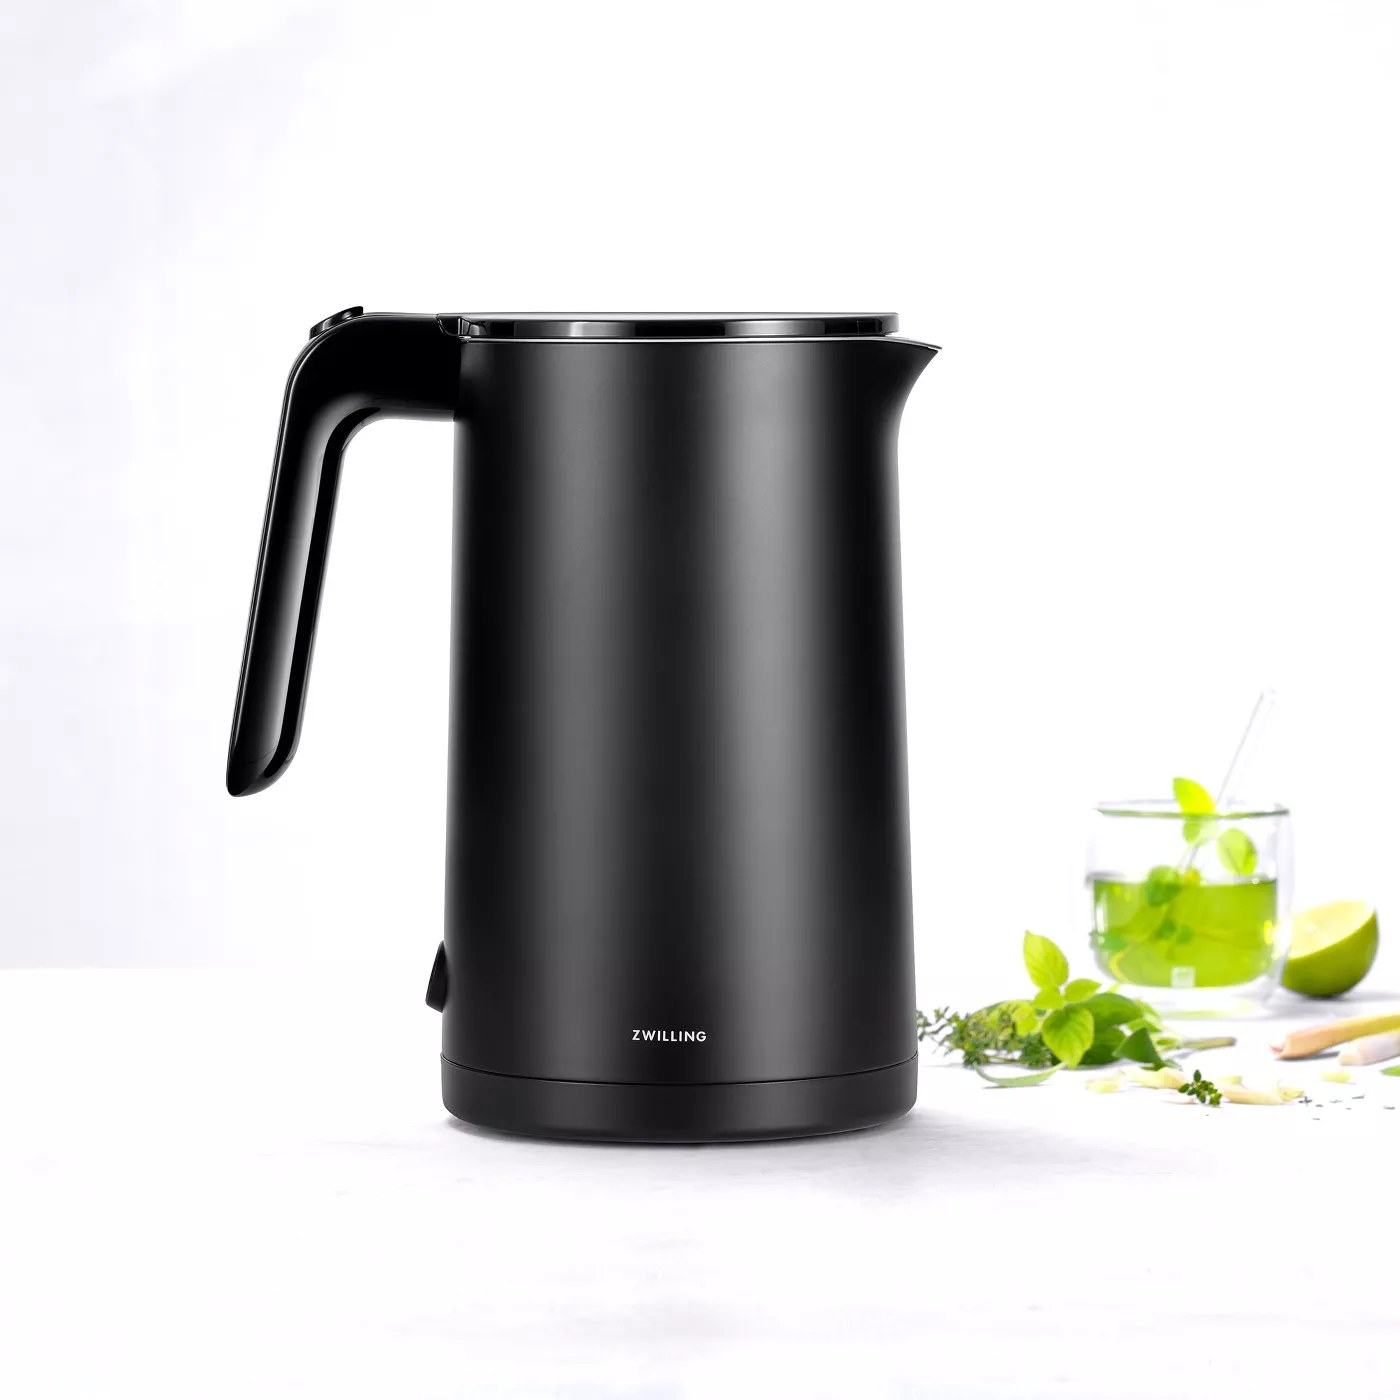 The black Zwilling kettle